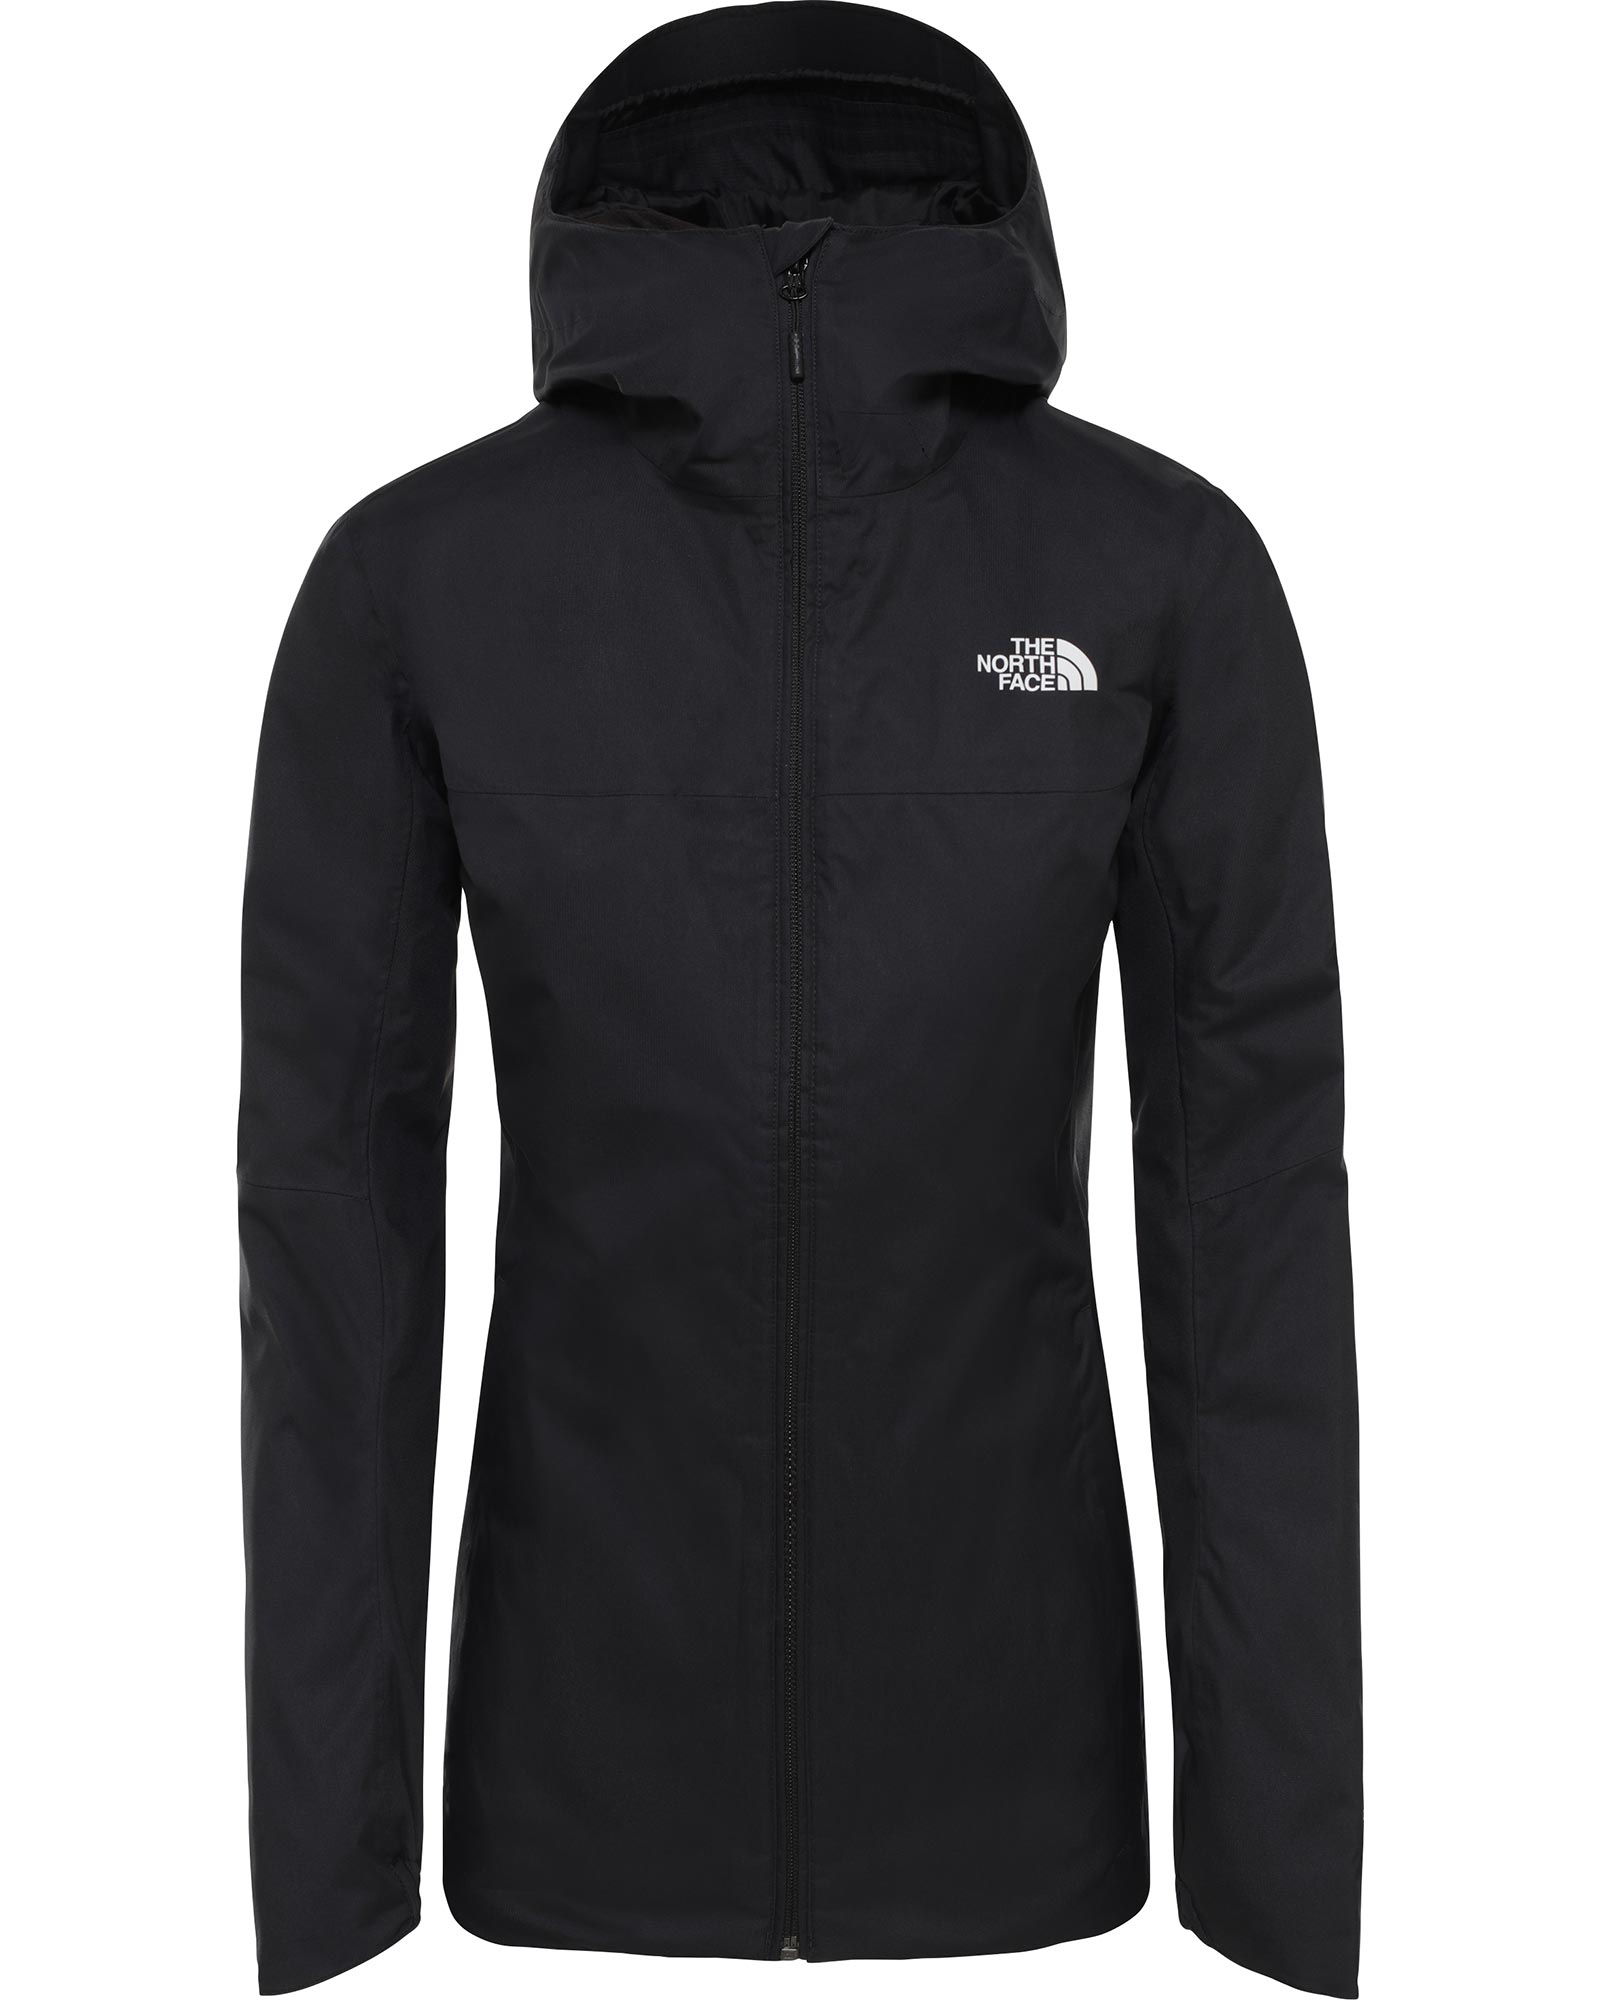 The North Face Quest DryVent Women’s Insulated Jacket - TNF Black XS